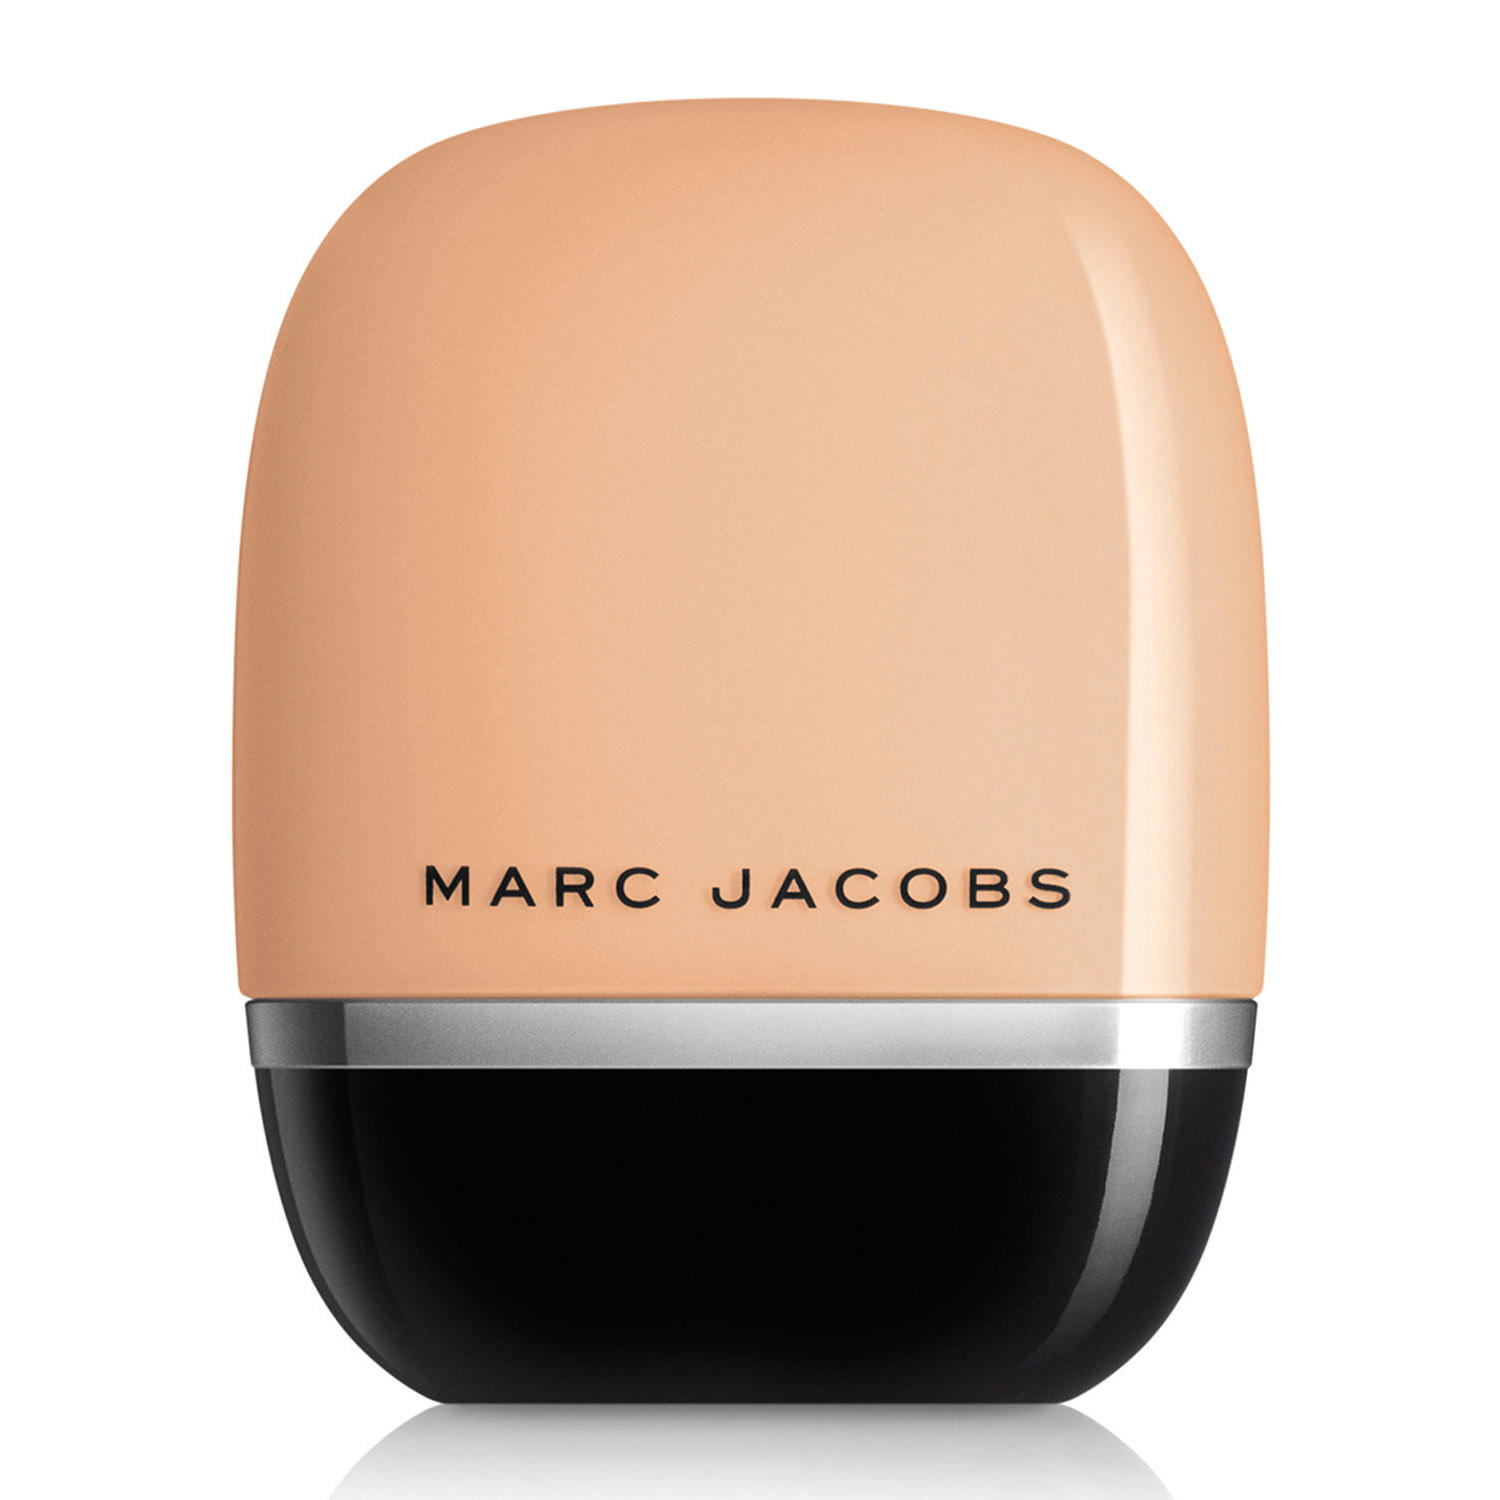 Marc Jacobs Shameless Youthful-Look 24H Foundation Light R230